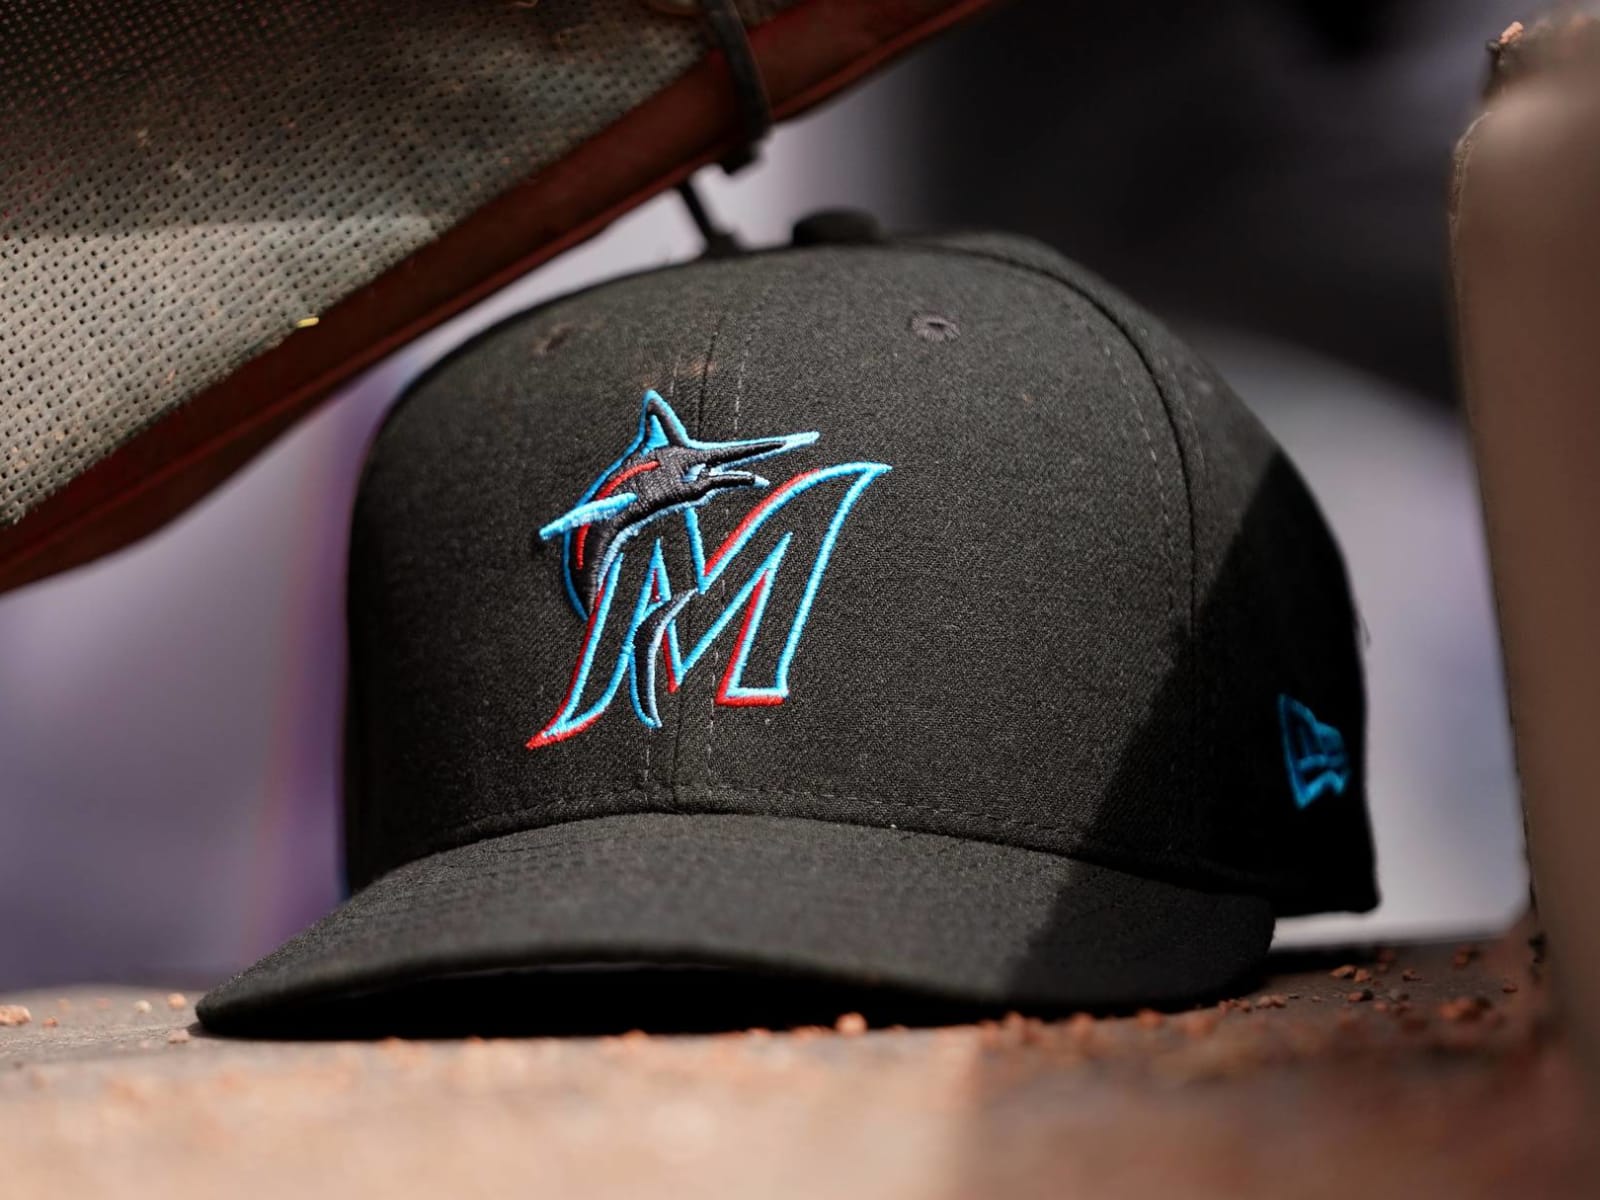 A Teal Treat: Marlins Throw Back to 1993 This Weekend – SportsLogos.Net News